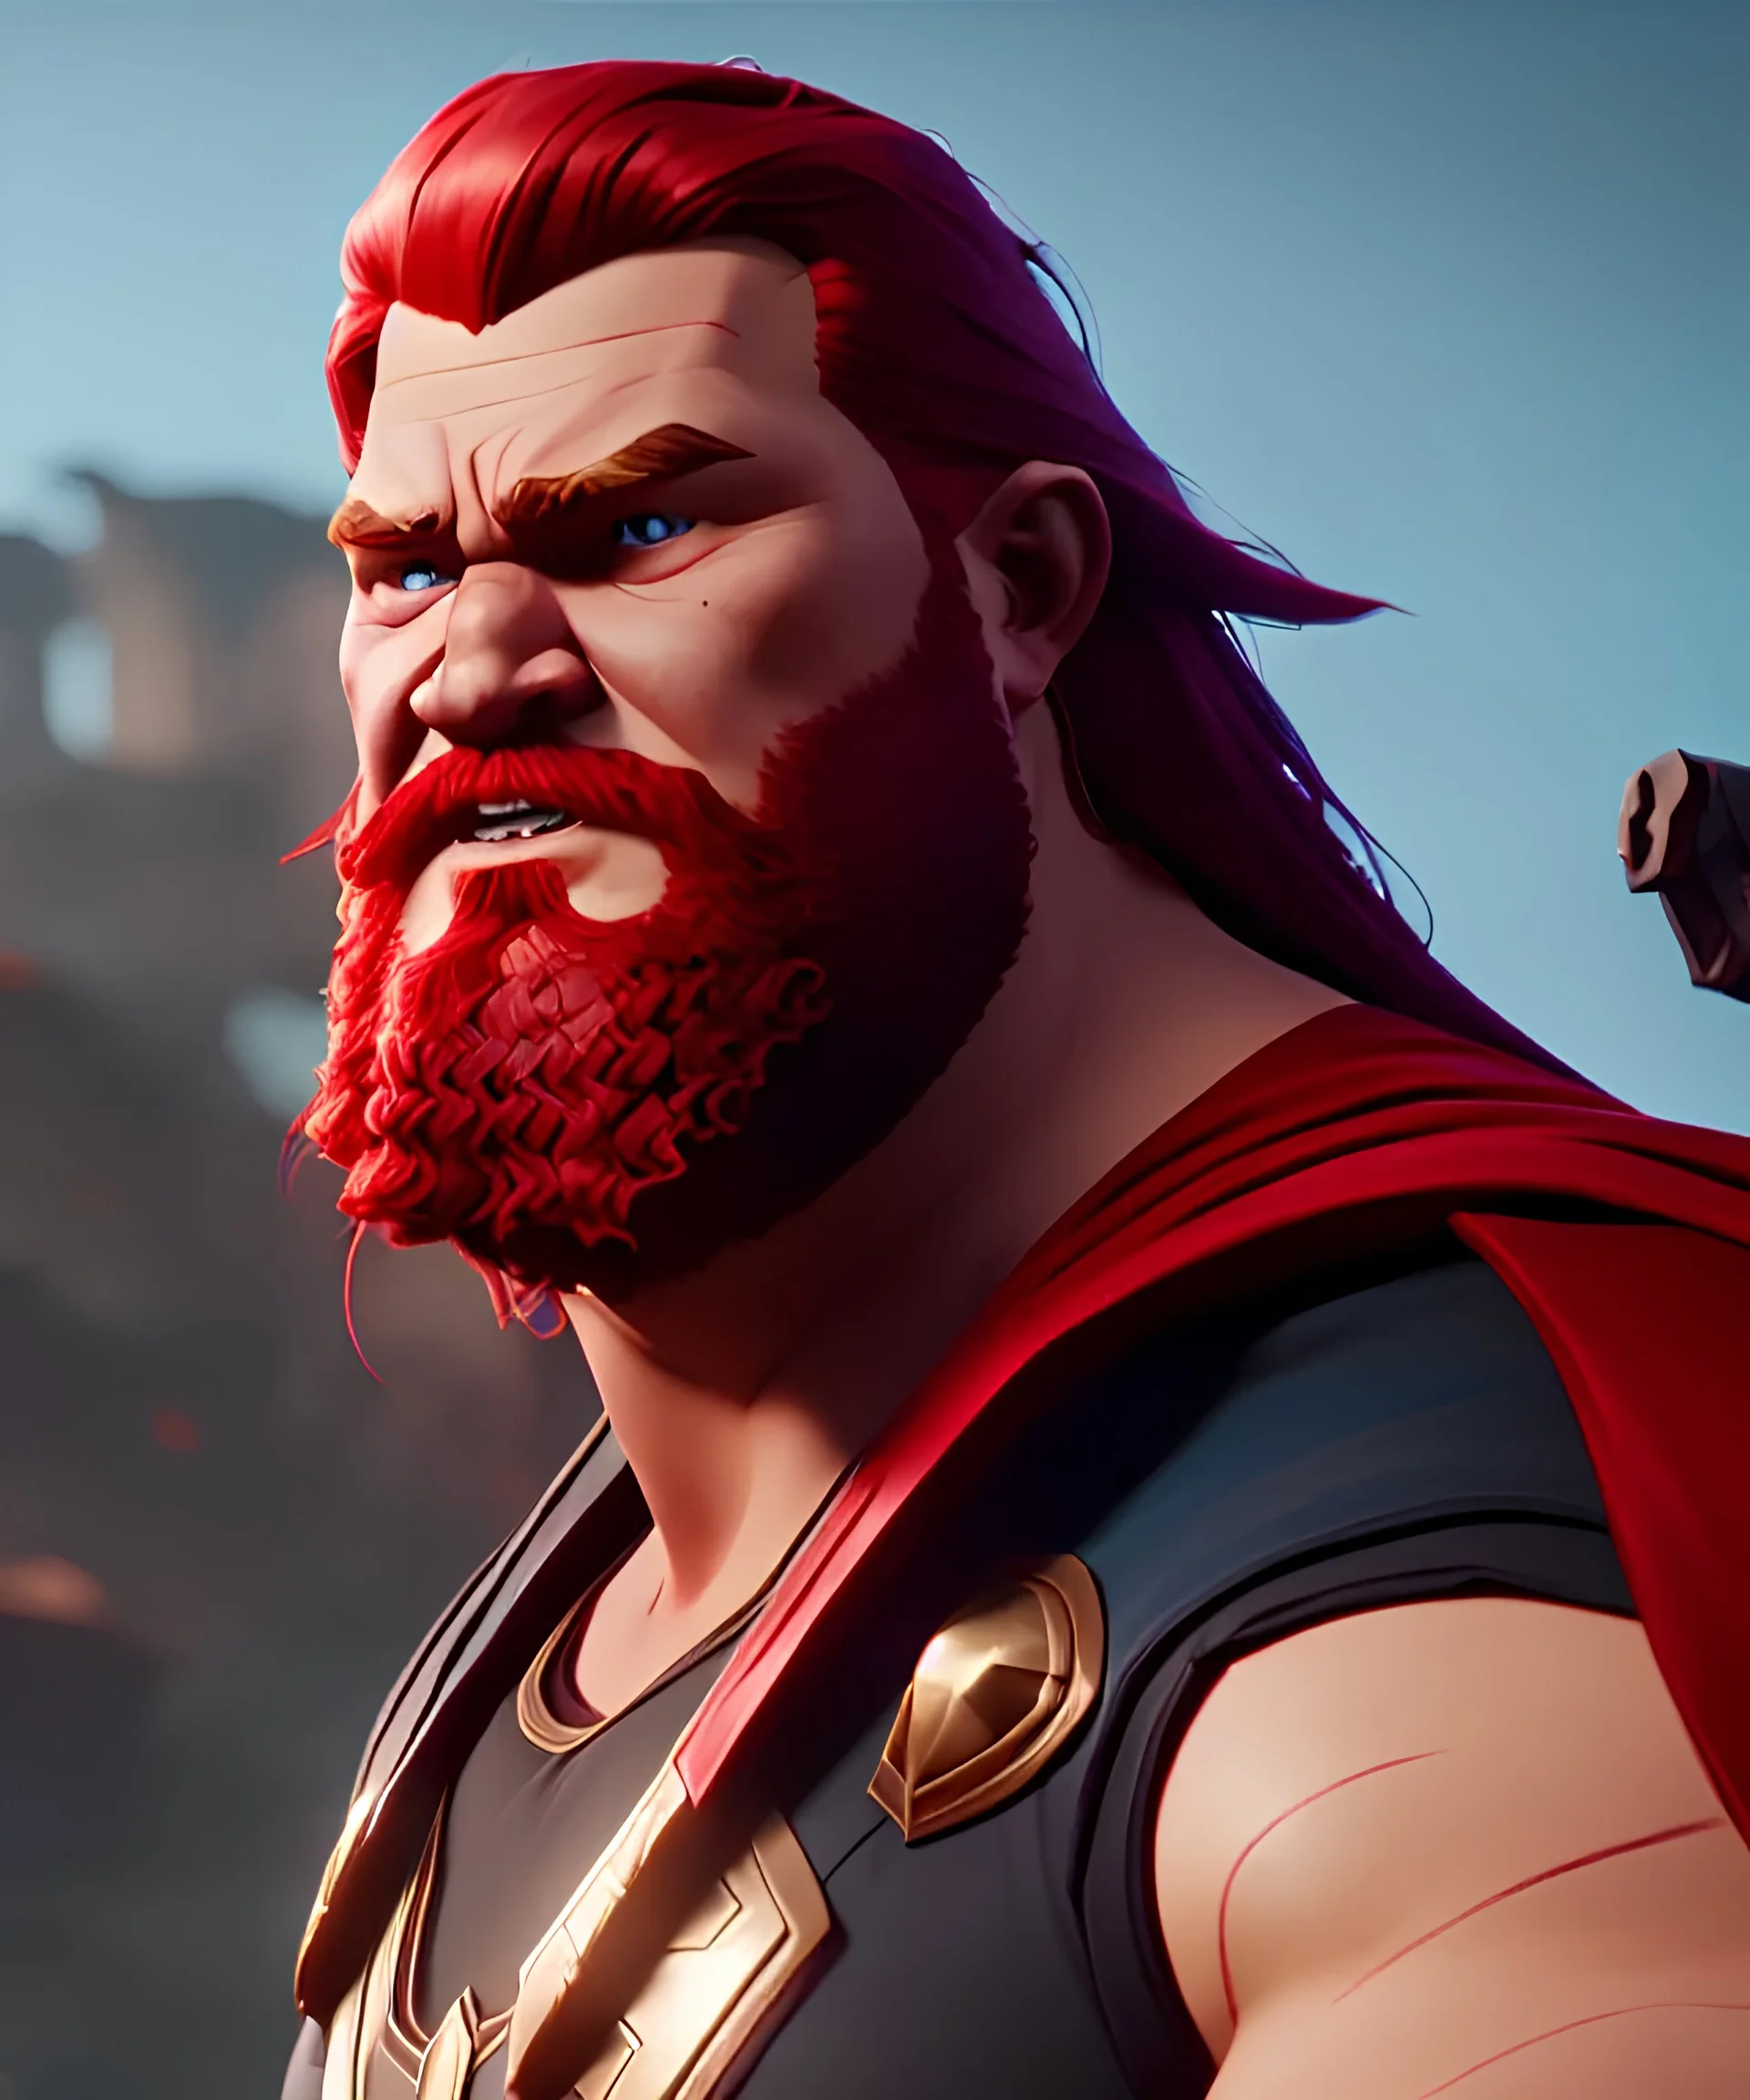 Fat thor with red hair, magnificent, majestic, Realistic photography, incredibly detailed, ultra high resolution, 8k, complex 3d render, cinema 4d.